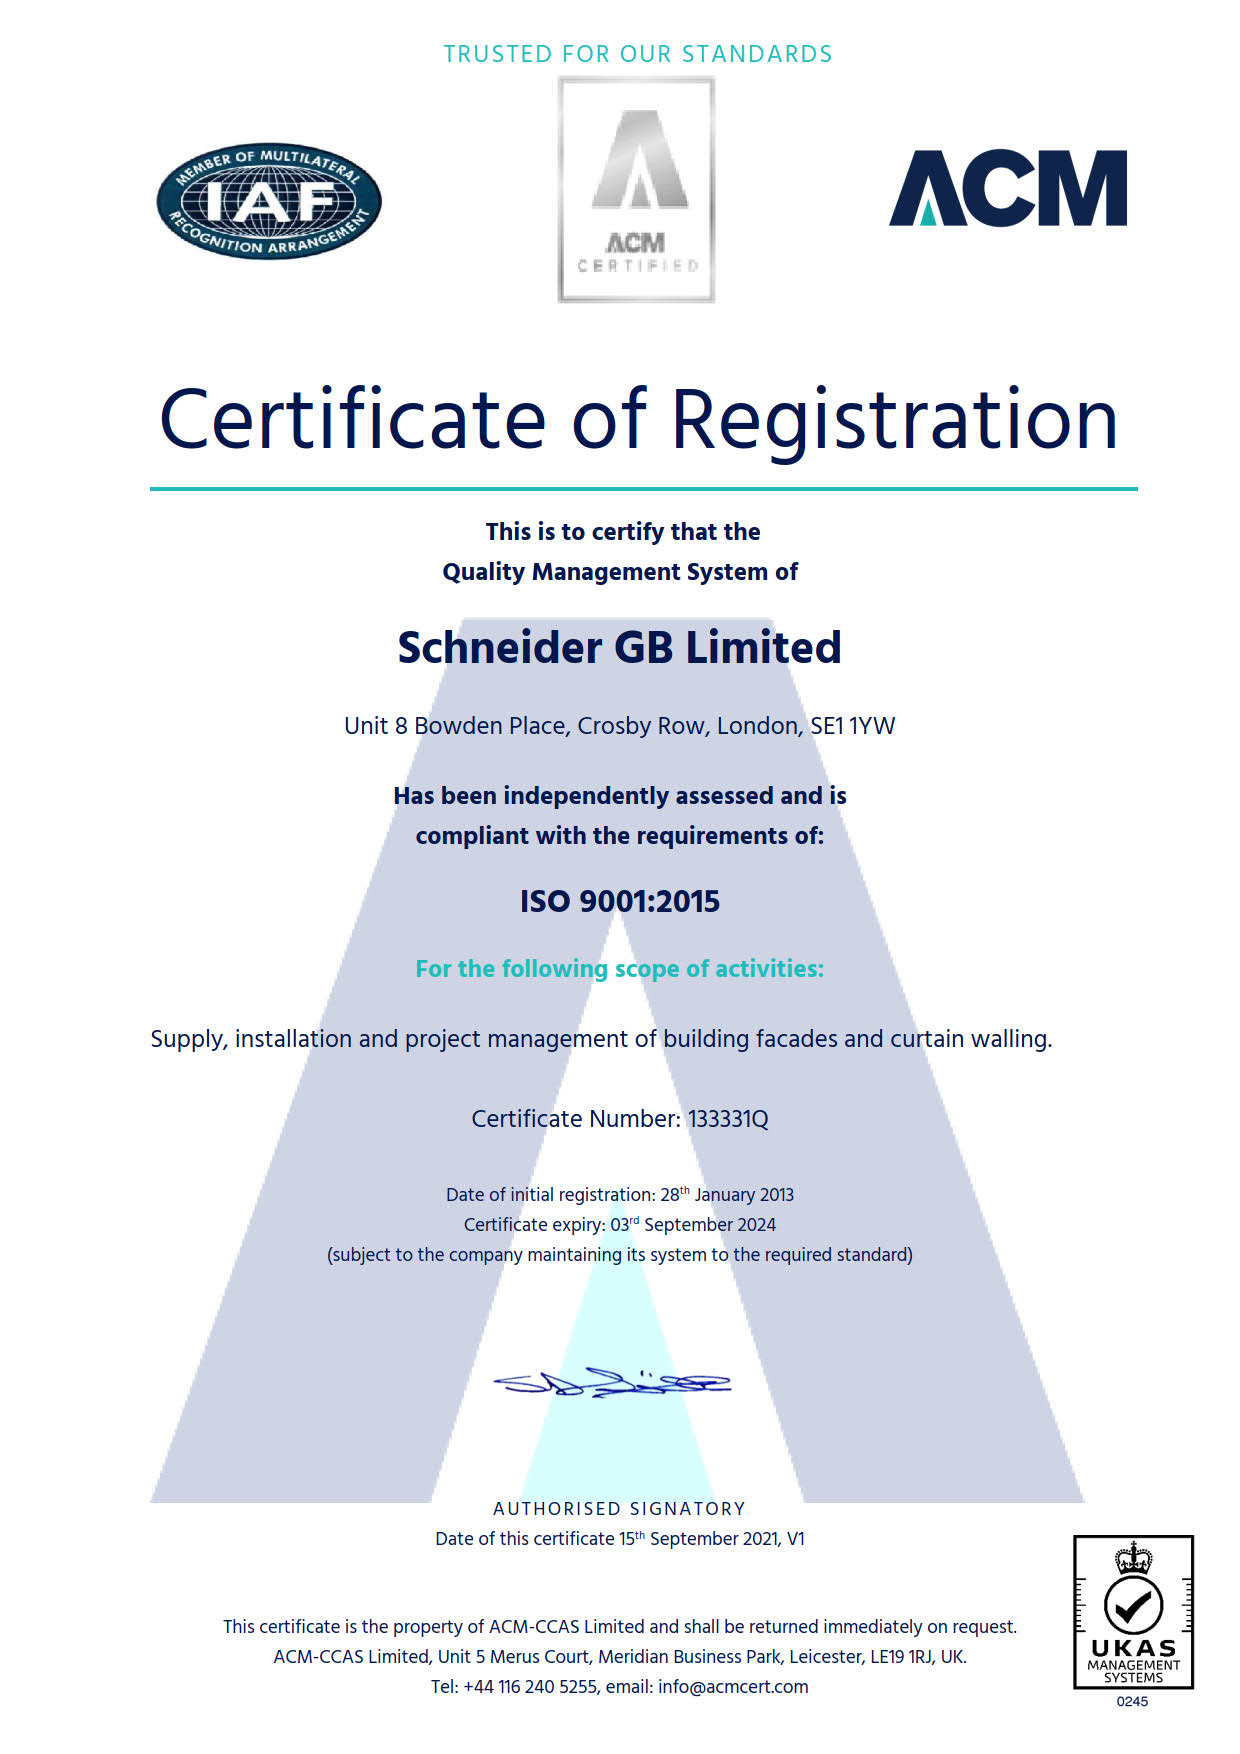 Policies, Certificates and Accreditations - Schneider